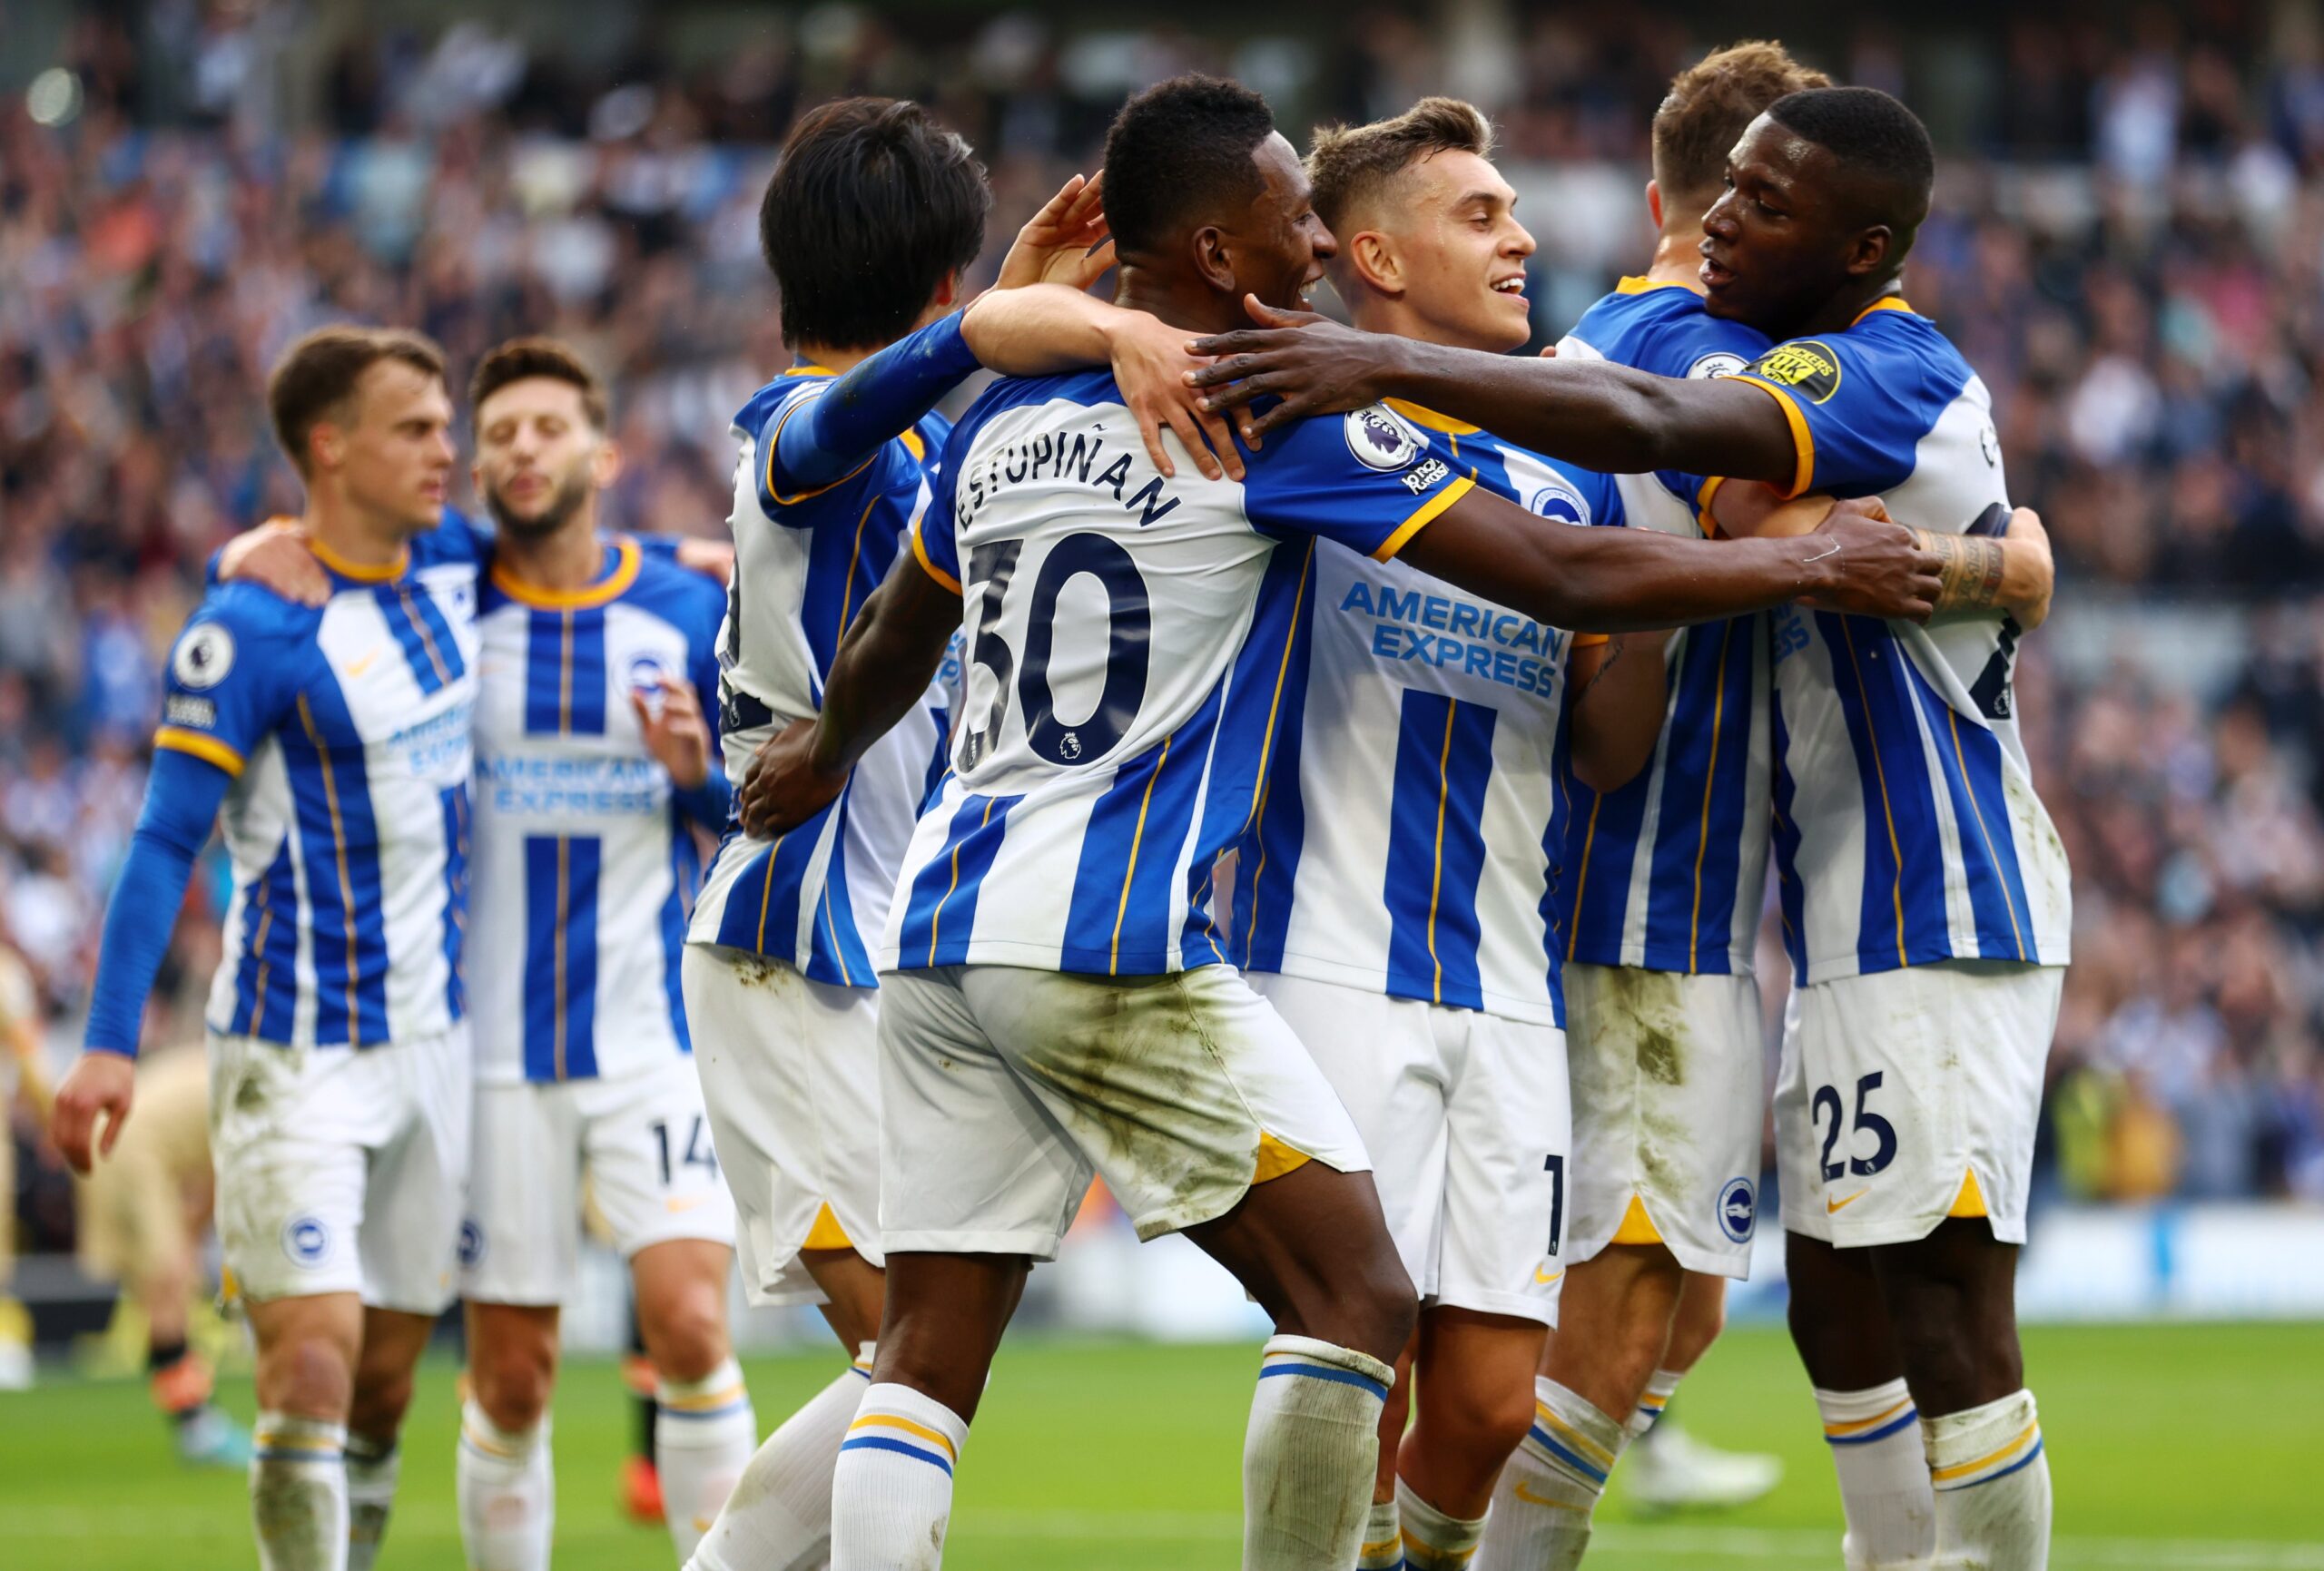 Brighton players celebrating after scoring against Chelsea. Credits: CBS